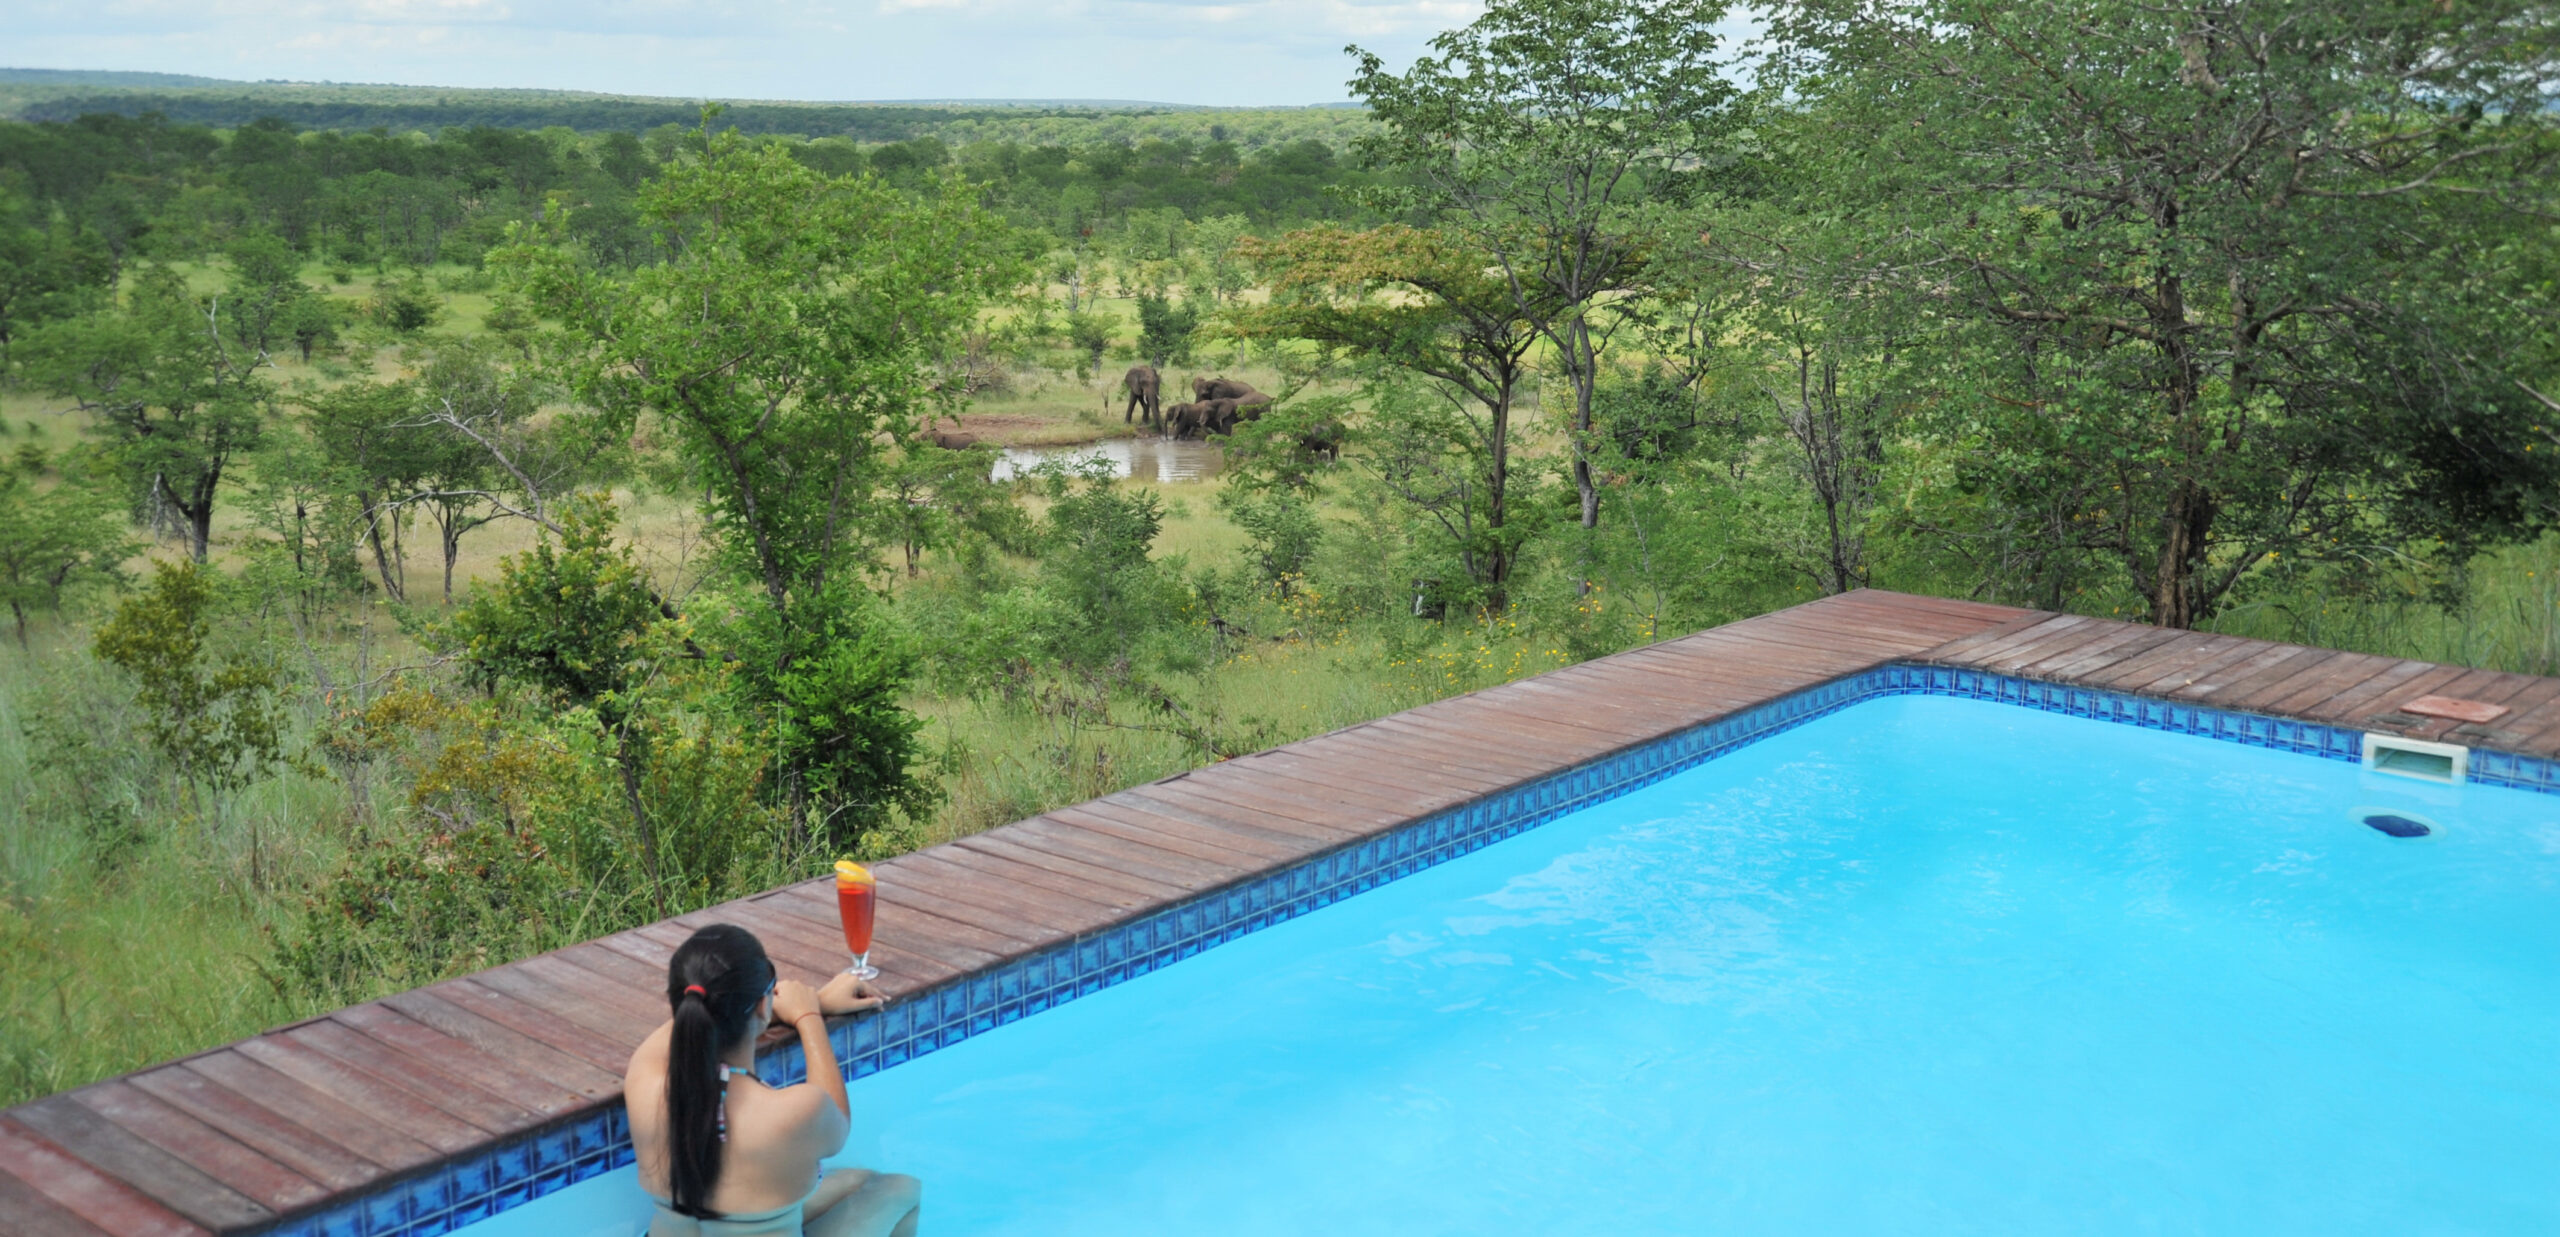 The-Elephant-Camp-Main-Pool-with-view-